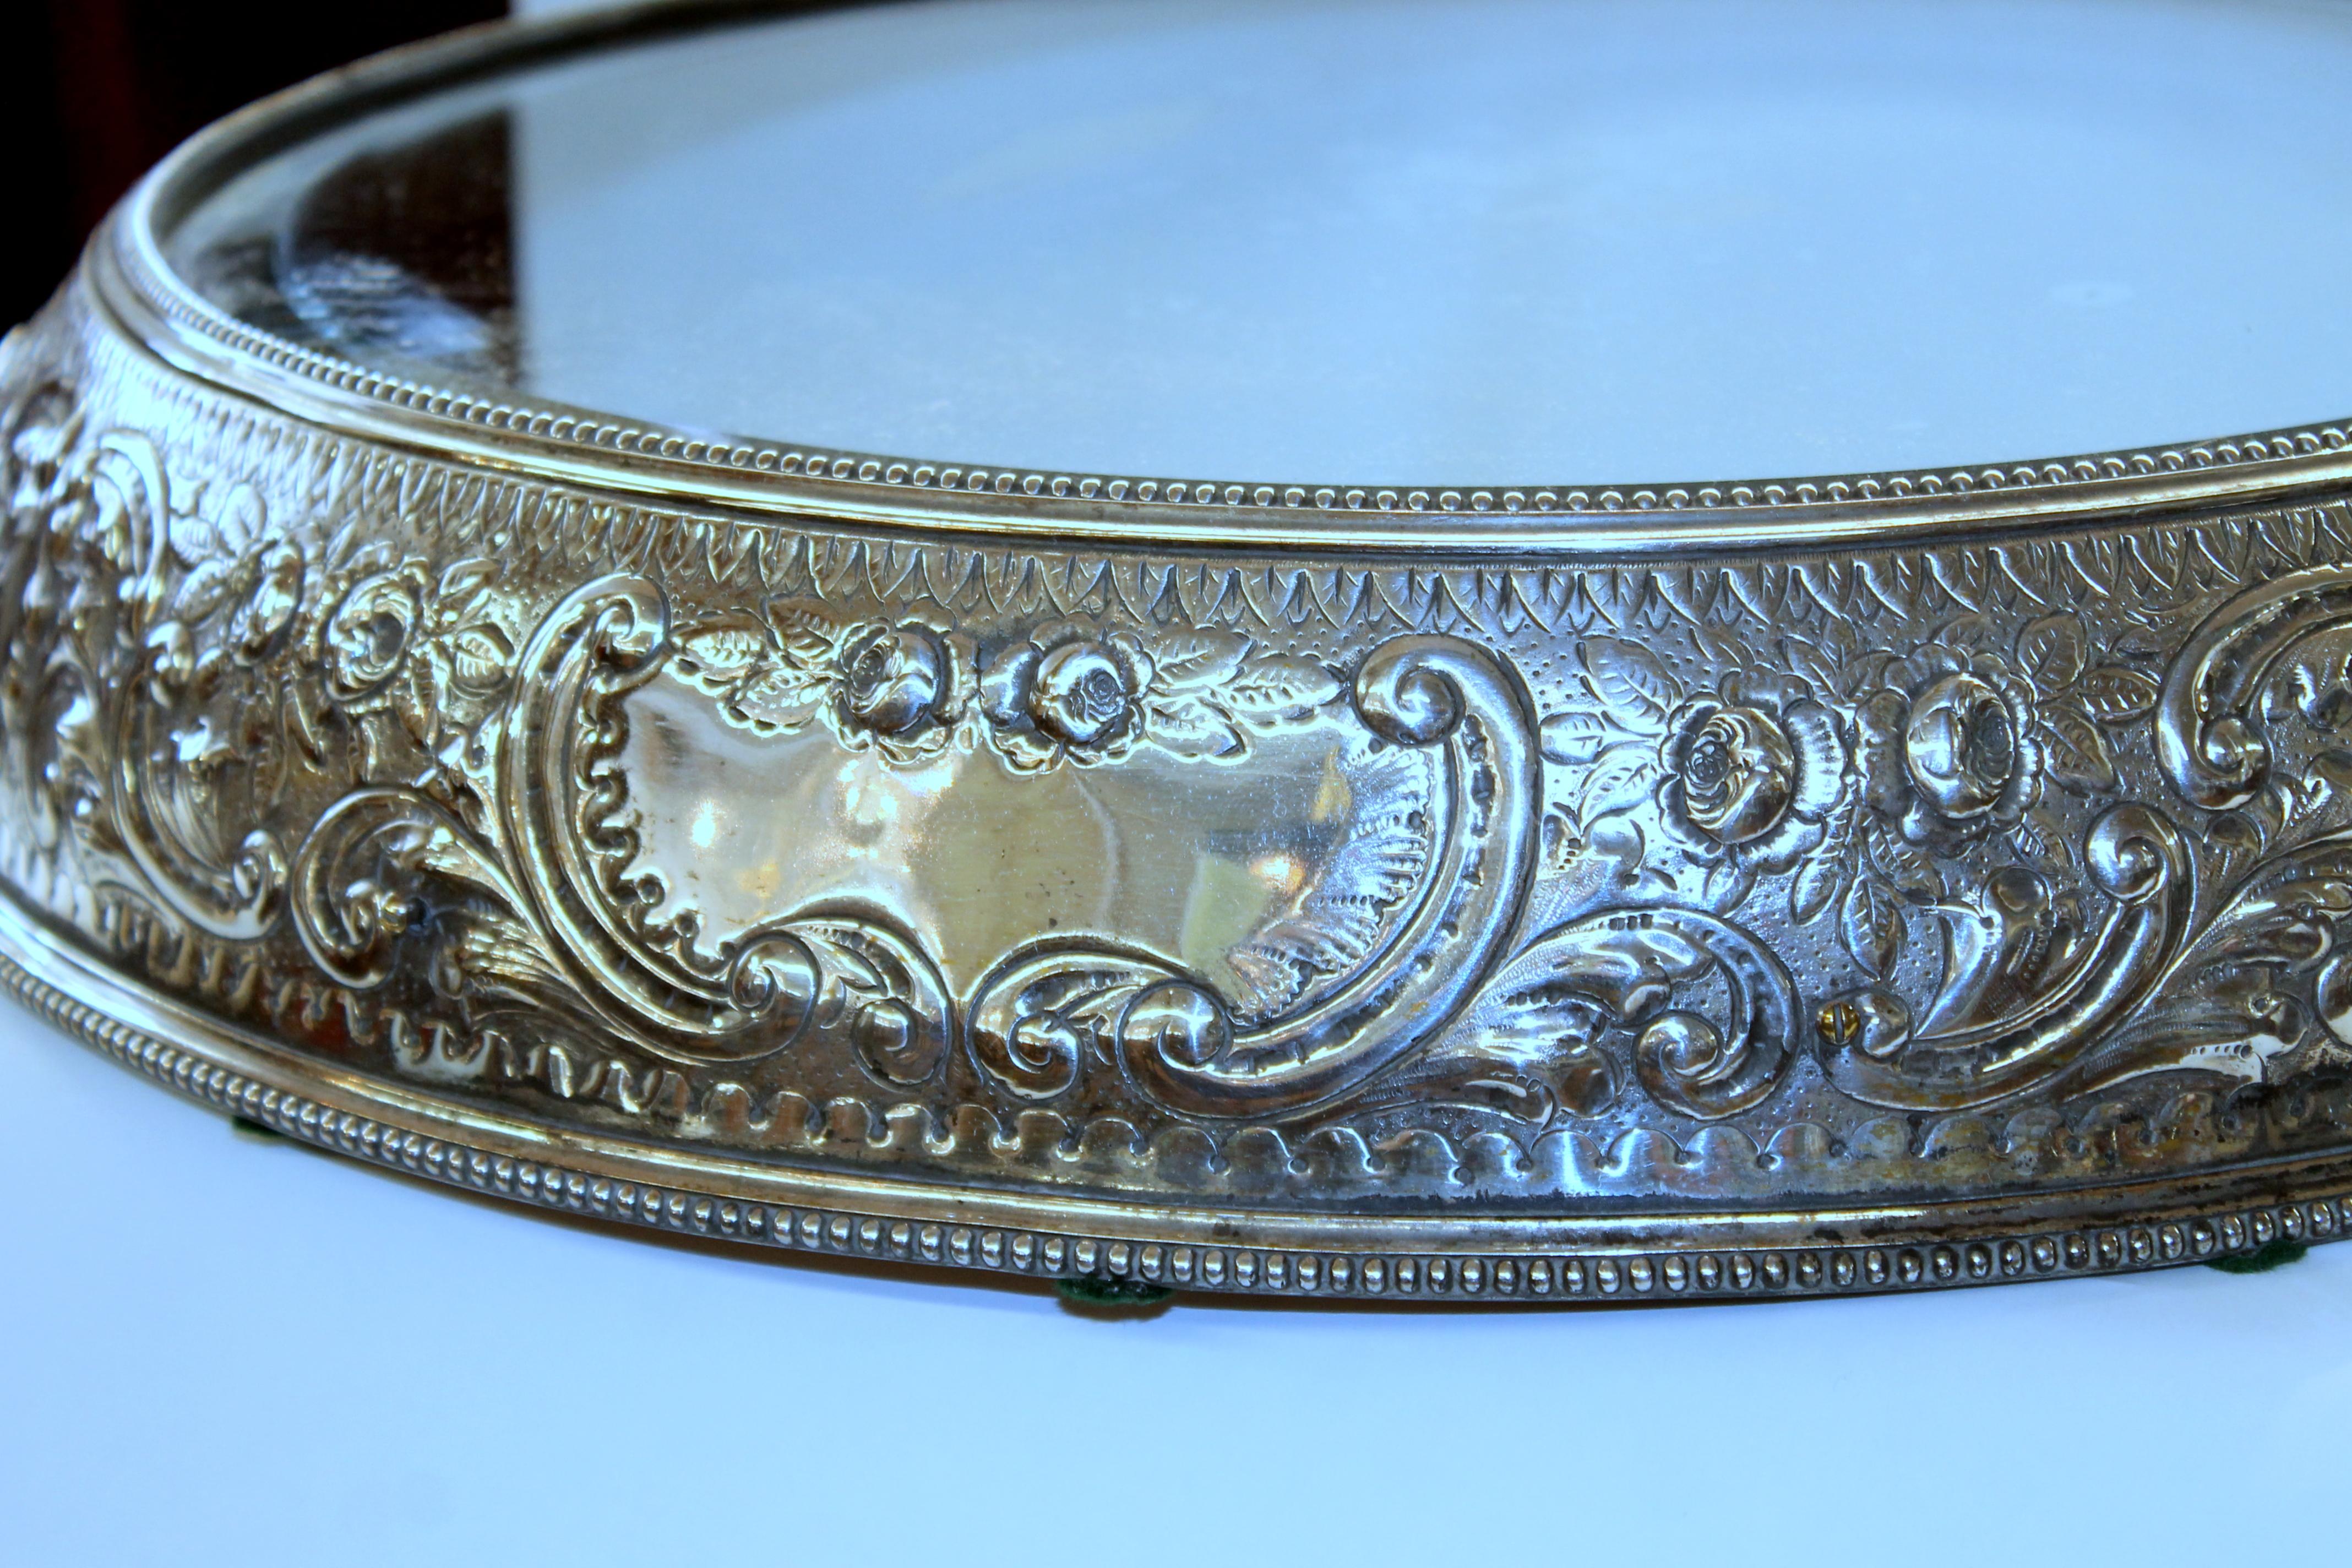 Magnificent antique English hand chased silver plate large, round mirror plateau.  

Unusually large size with exceptional hand chased border; original beveled mirrored glass (some spots beneath the mirrored glass noted); some minor plate loss